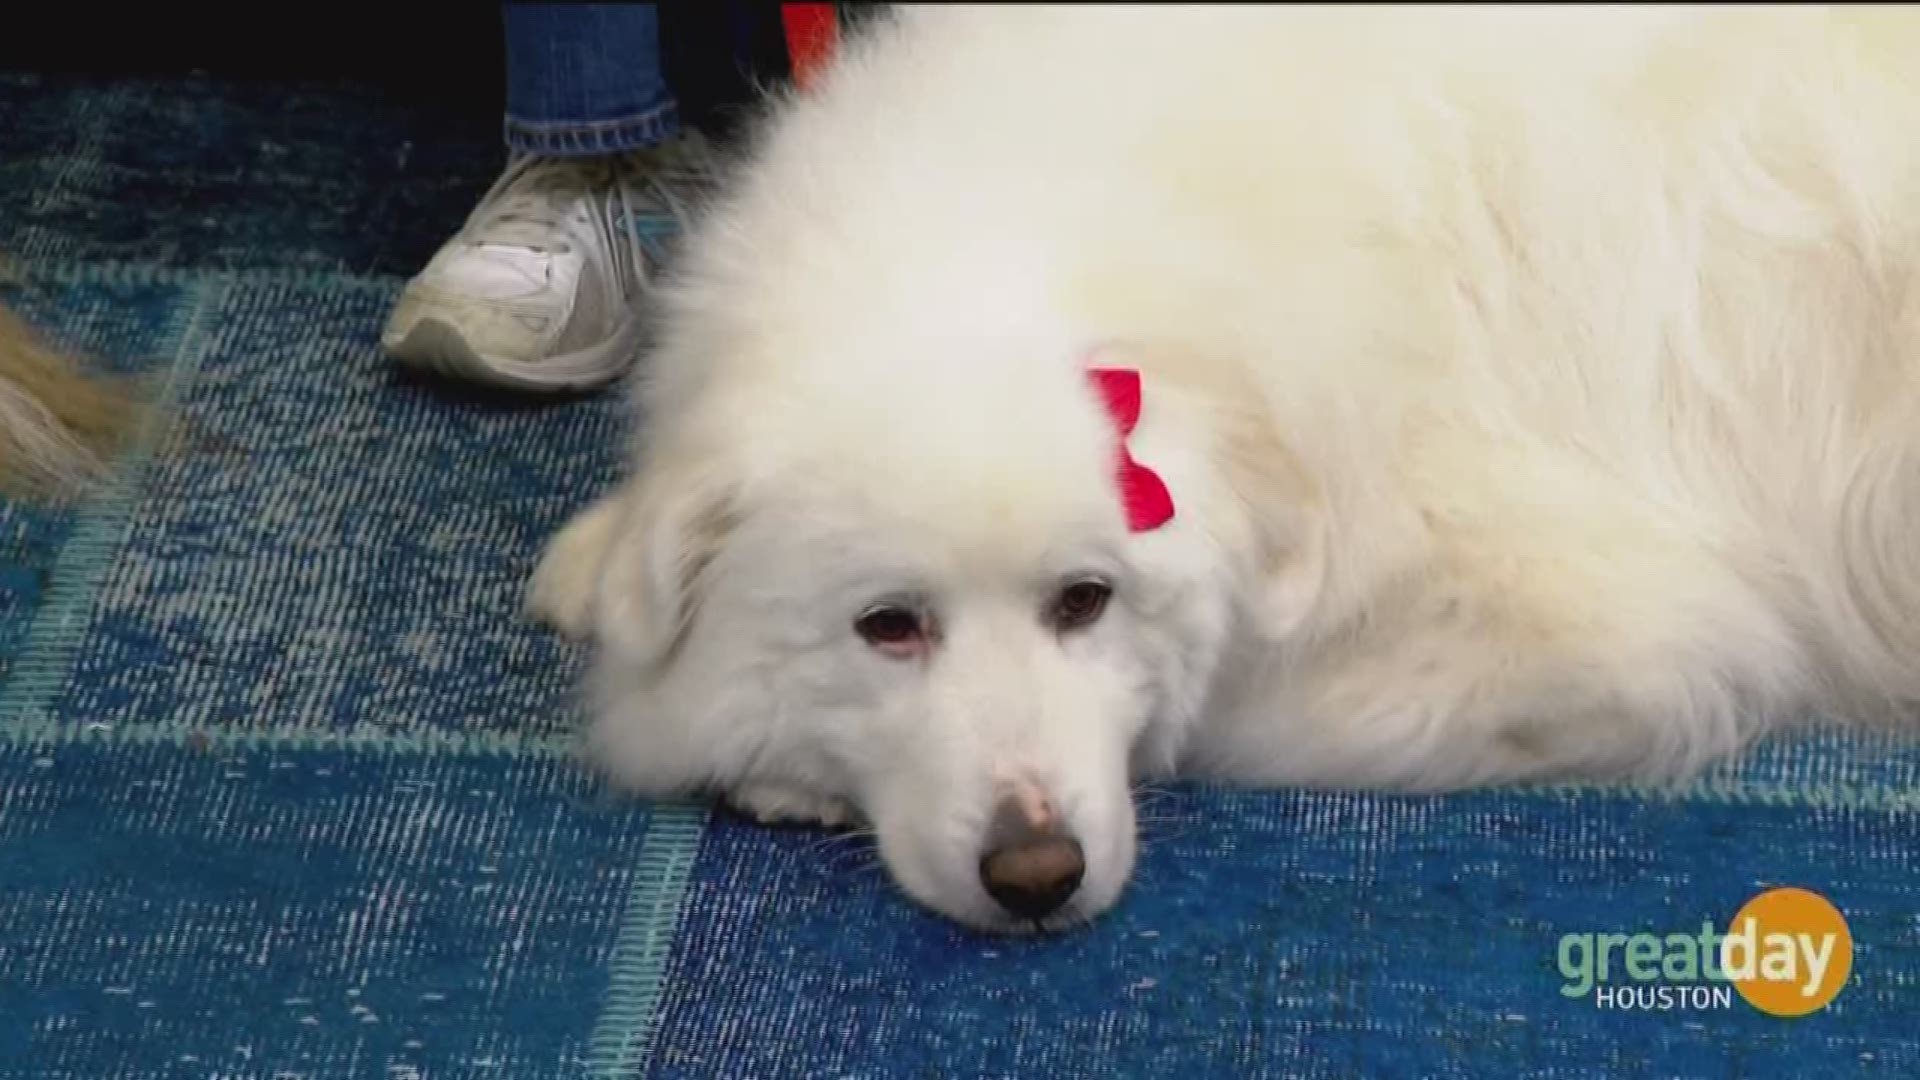 The organization touches hearts in Houston and the surrounding area through their therapy dogs.